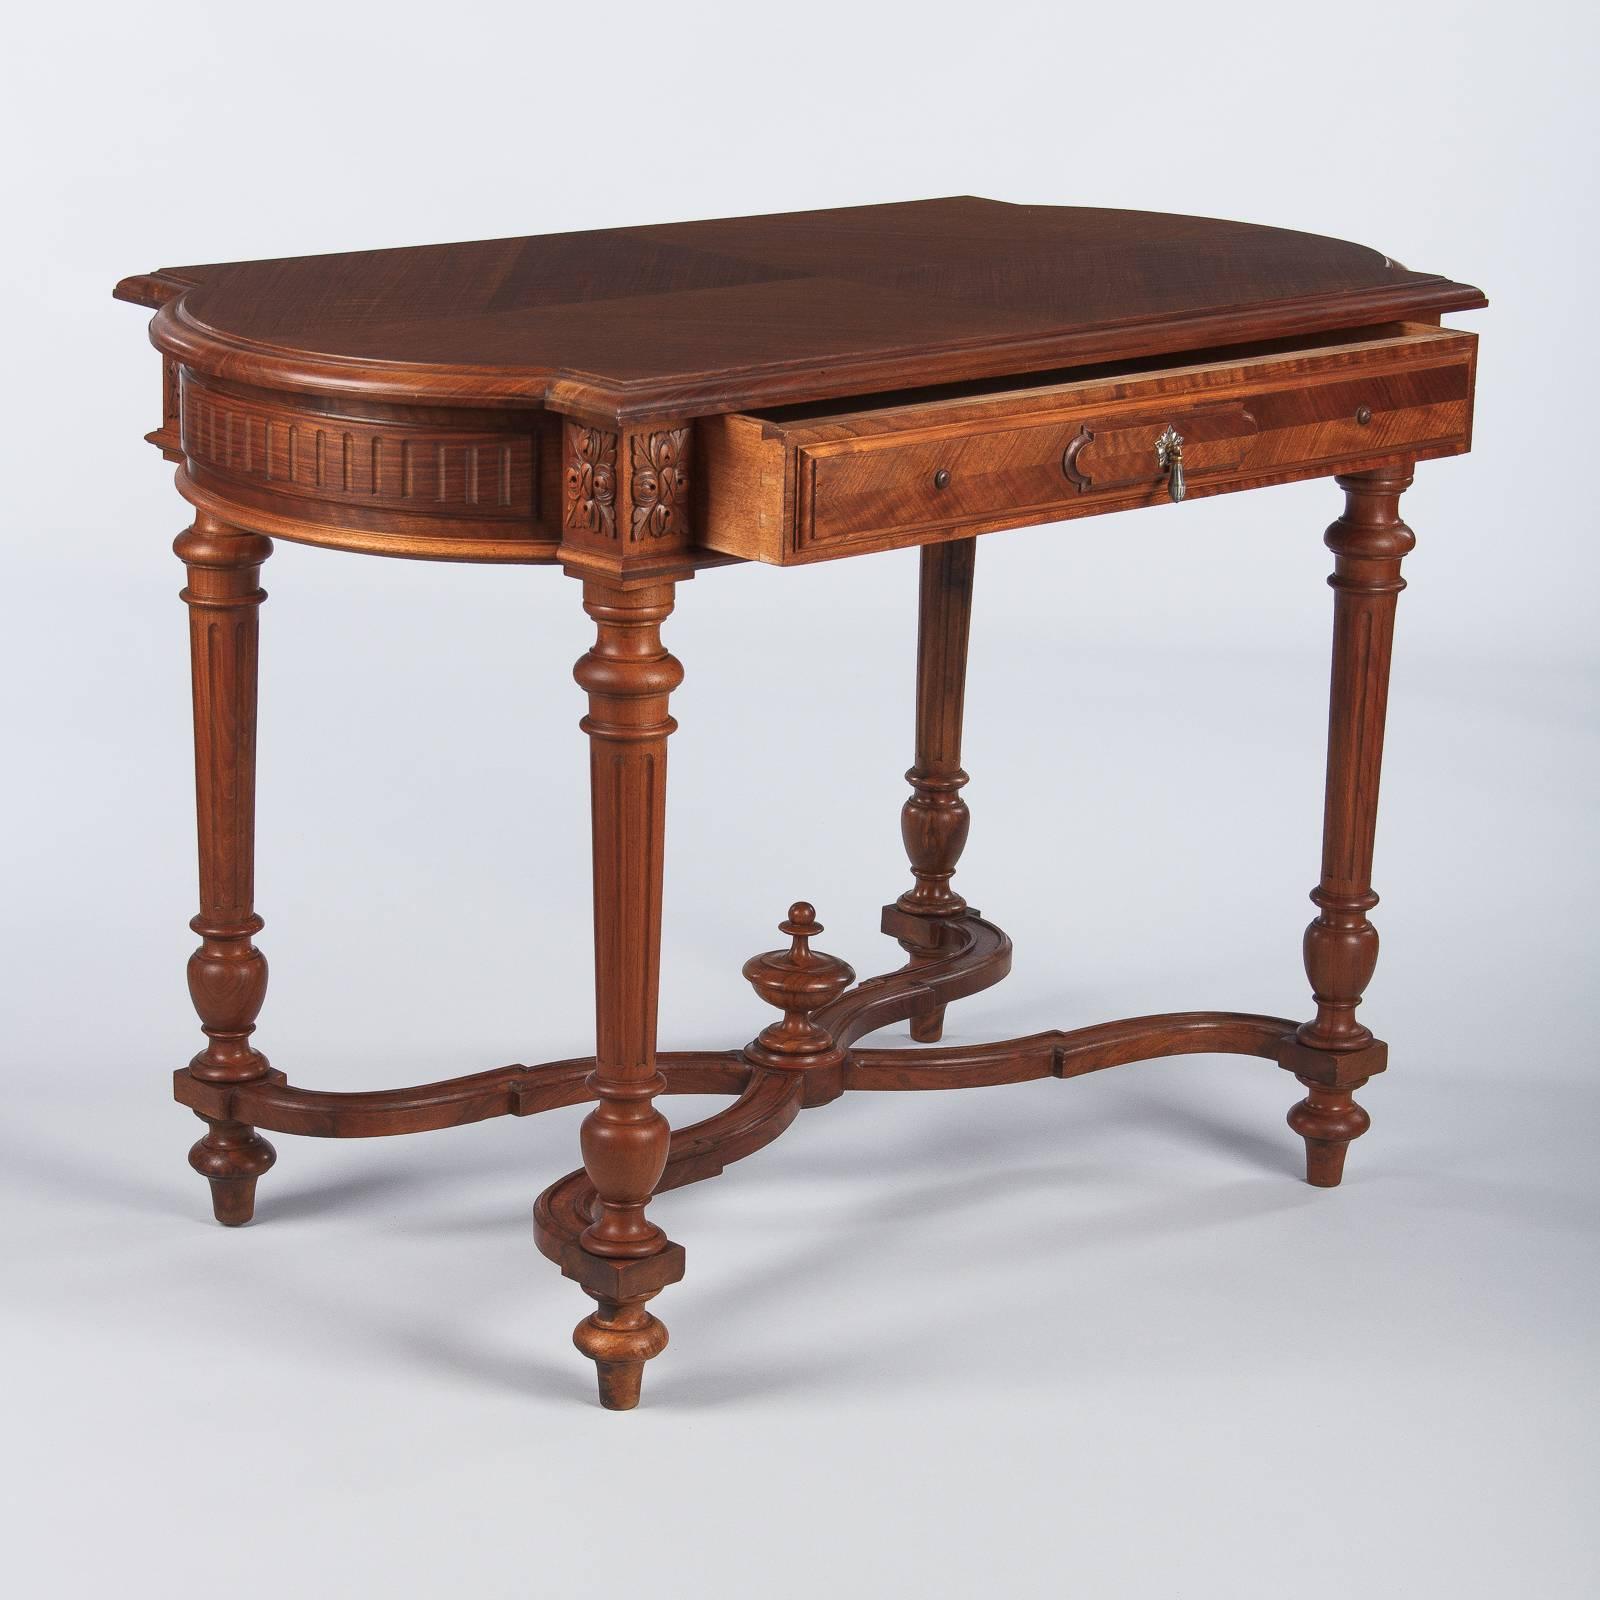 A dapper cherrywood Louis XVI style desk, circa 1900. Wonderful cherrywood veneer on top forms a tight series of concentric diamonds. Bowed sides give the piece a unique outline. The apron is fluted on the sides and has relief carved foliate